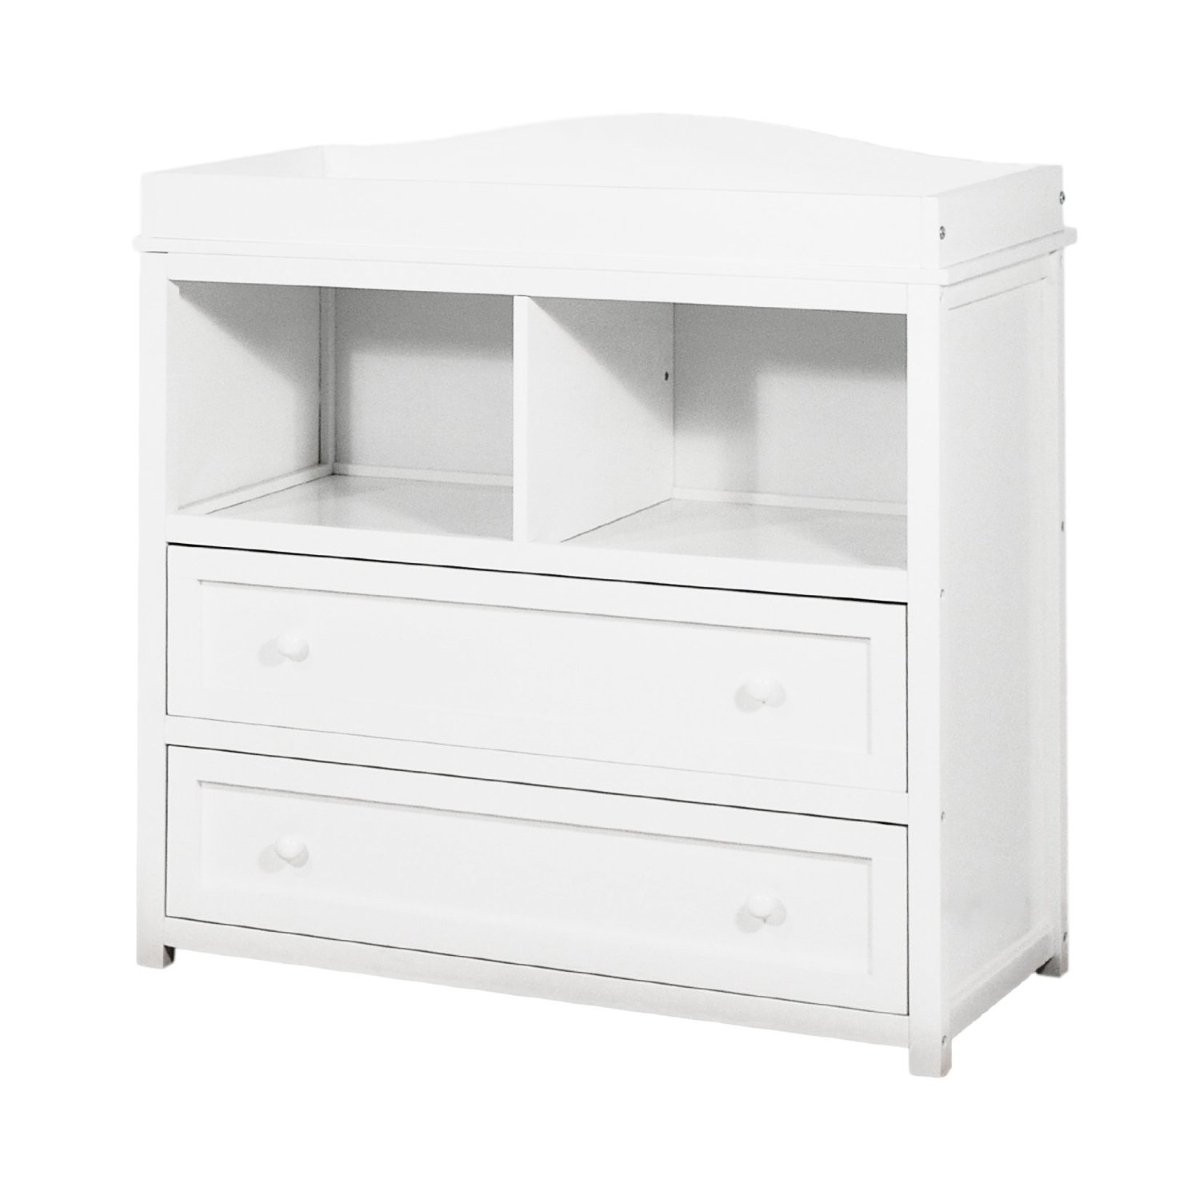 White Dressers For Baby Room
 White Dresser for Baby Room Home Furniture Design